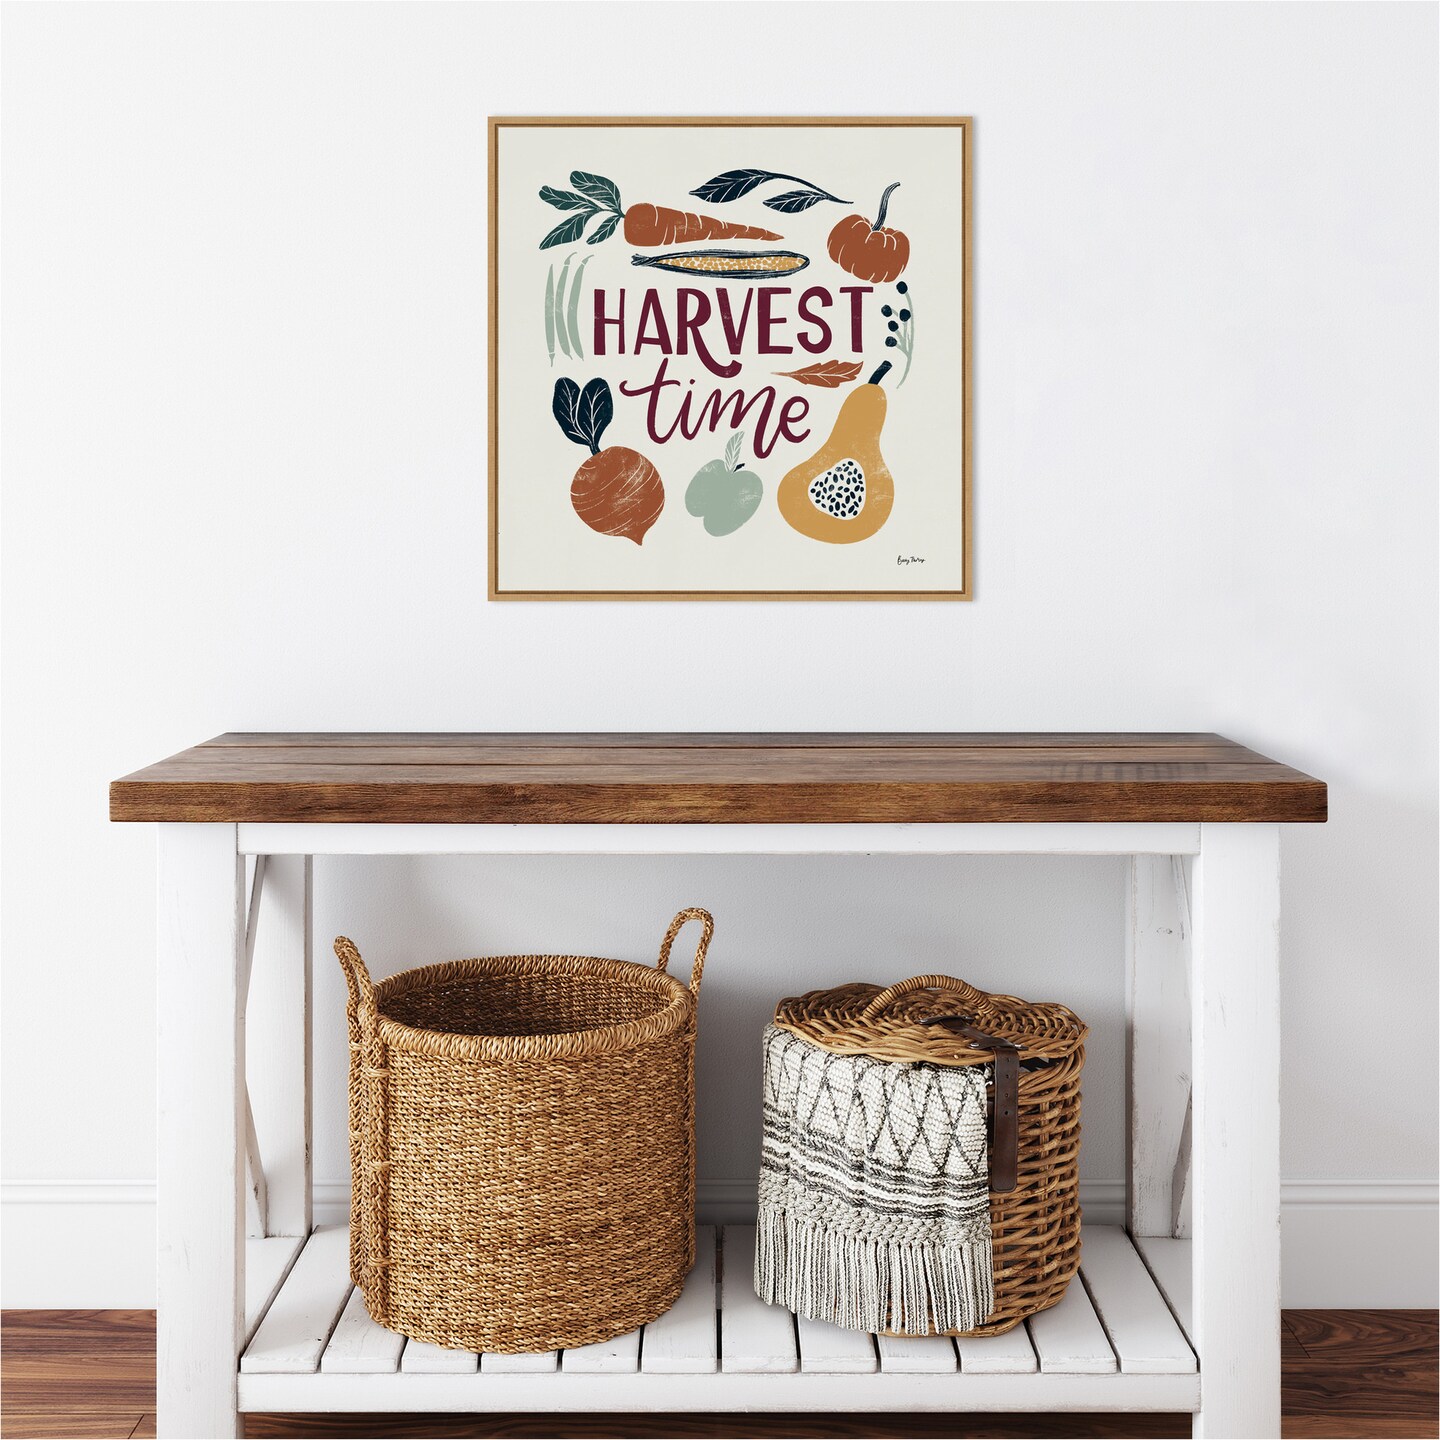 Harvest Lettering I by Becky Thorns 22-in. W x 22-in. H. Canvas Wall Art Print Framed in Natural